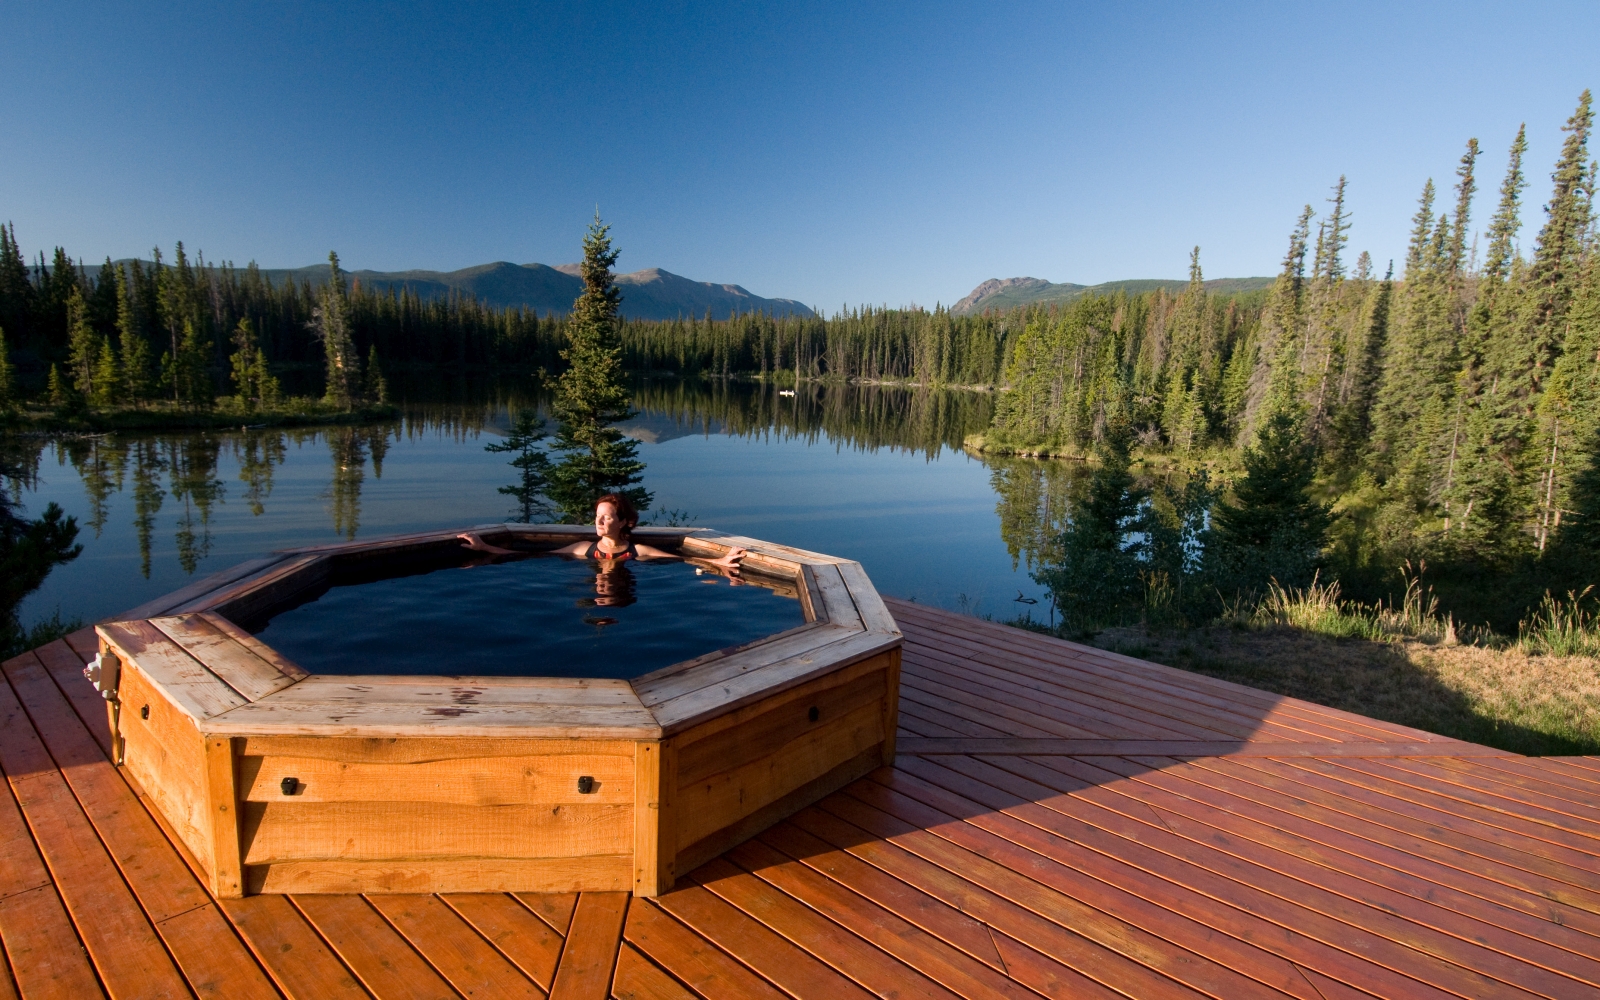 Hot tub on a wooden deck with a lake behind it